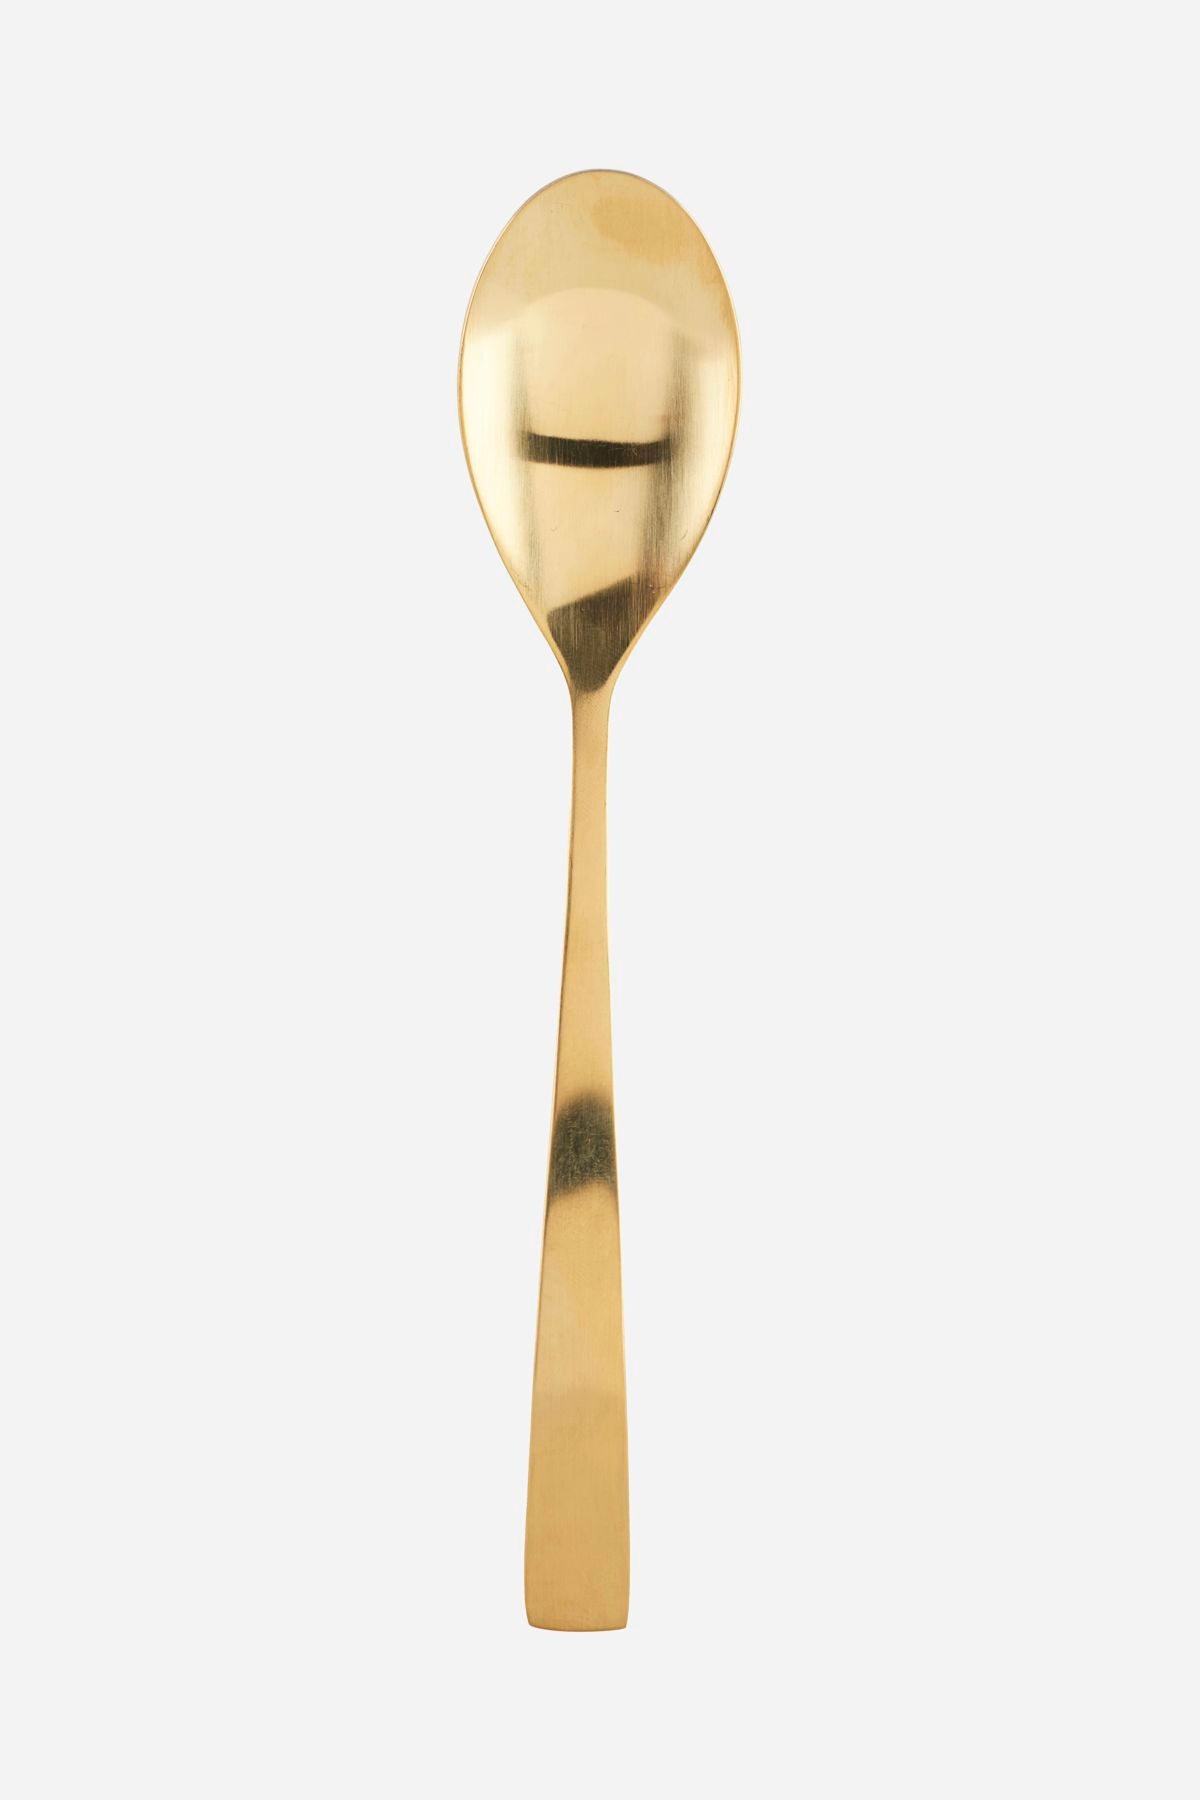 Dessert Spoon | Gold Plated Stainless Steel | by House Doctor - Lifestory - House Doctor